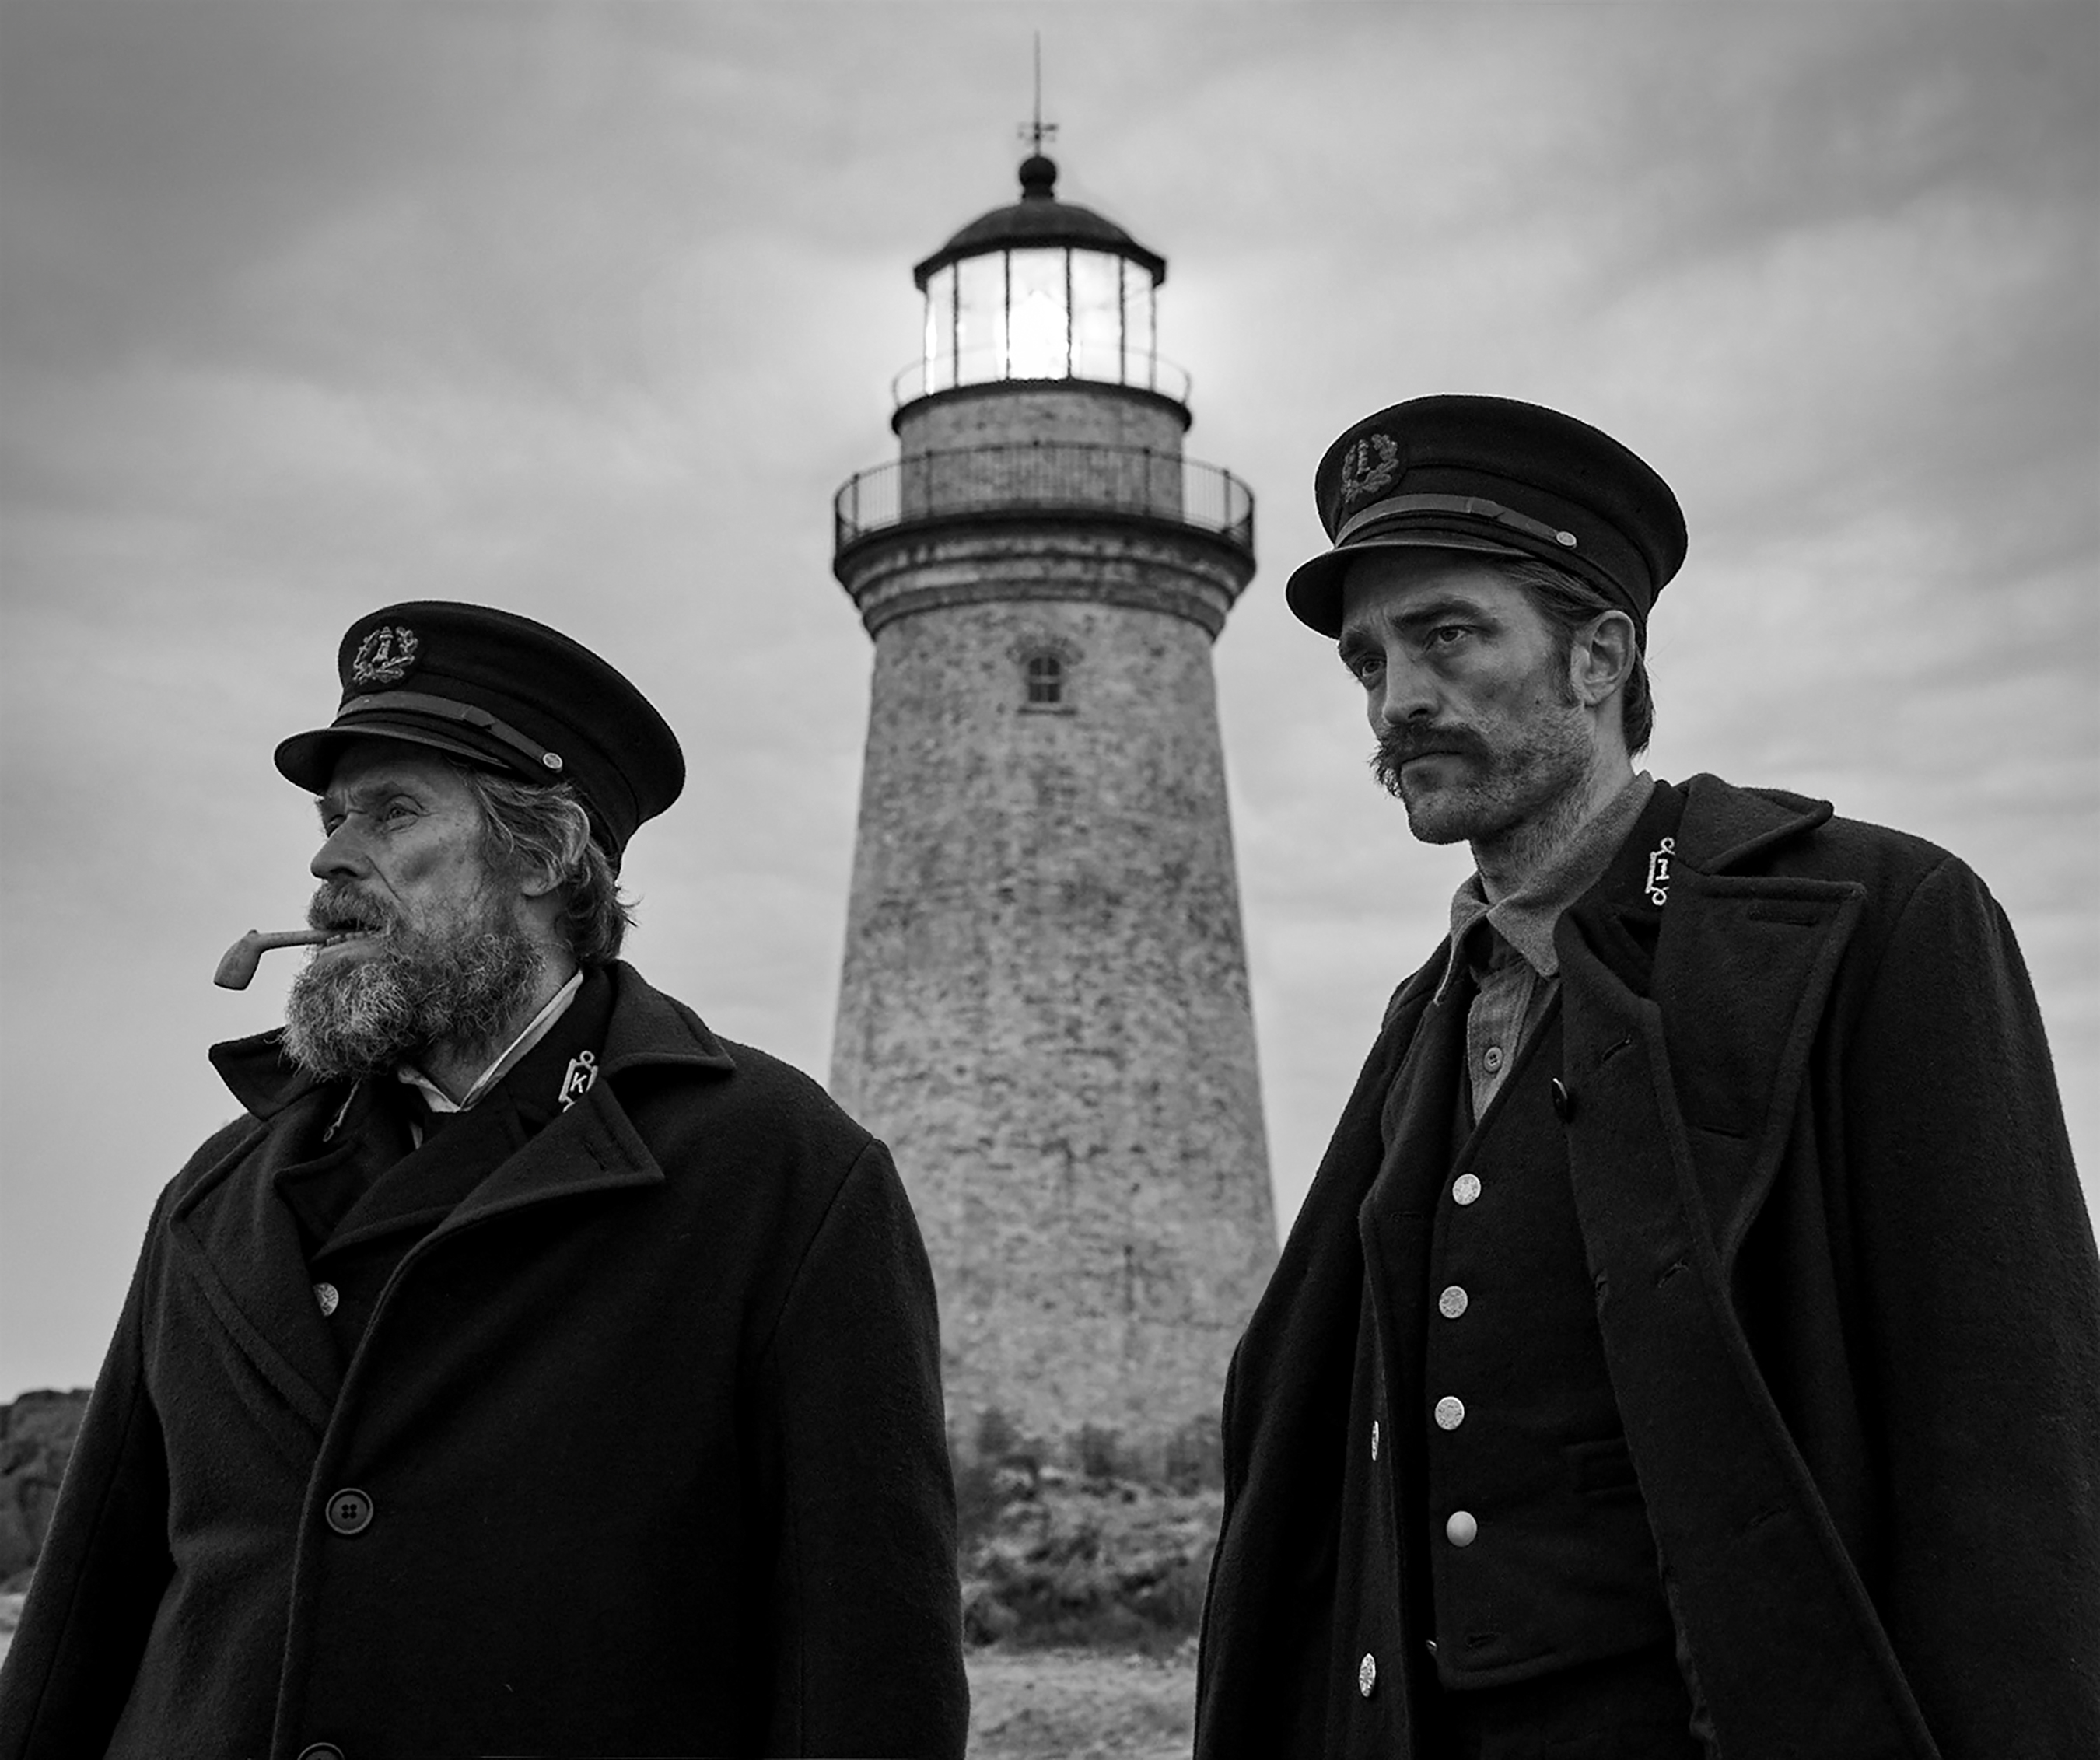 Movie Review: THE LIGHTHOUSE